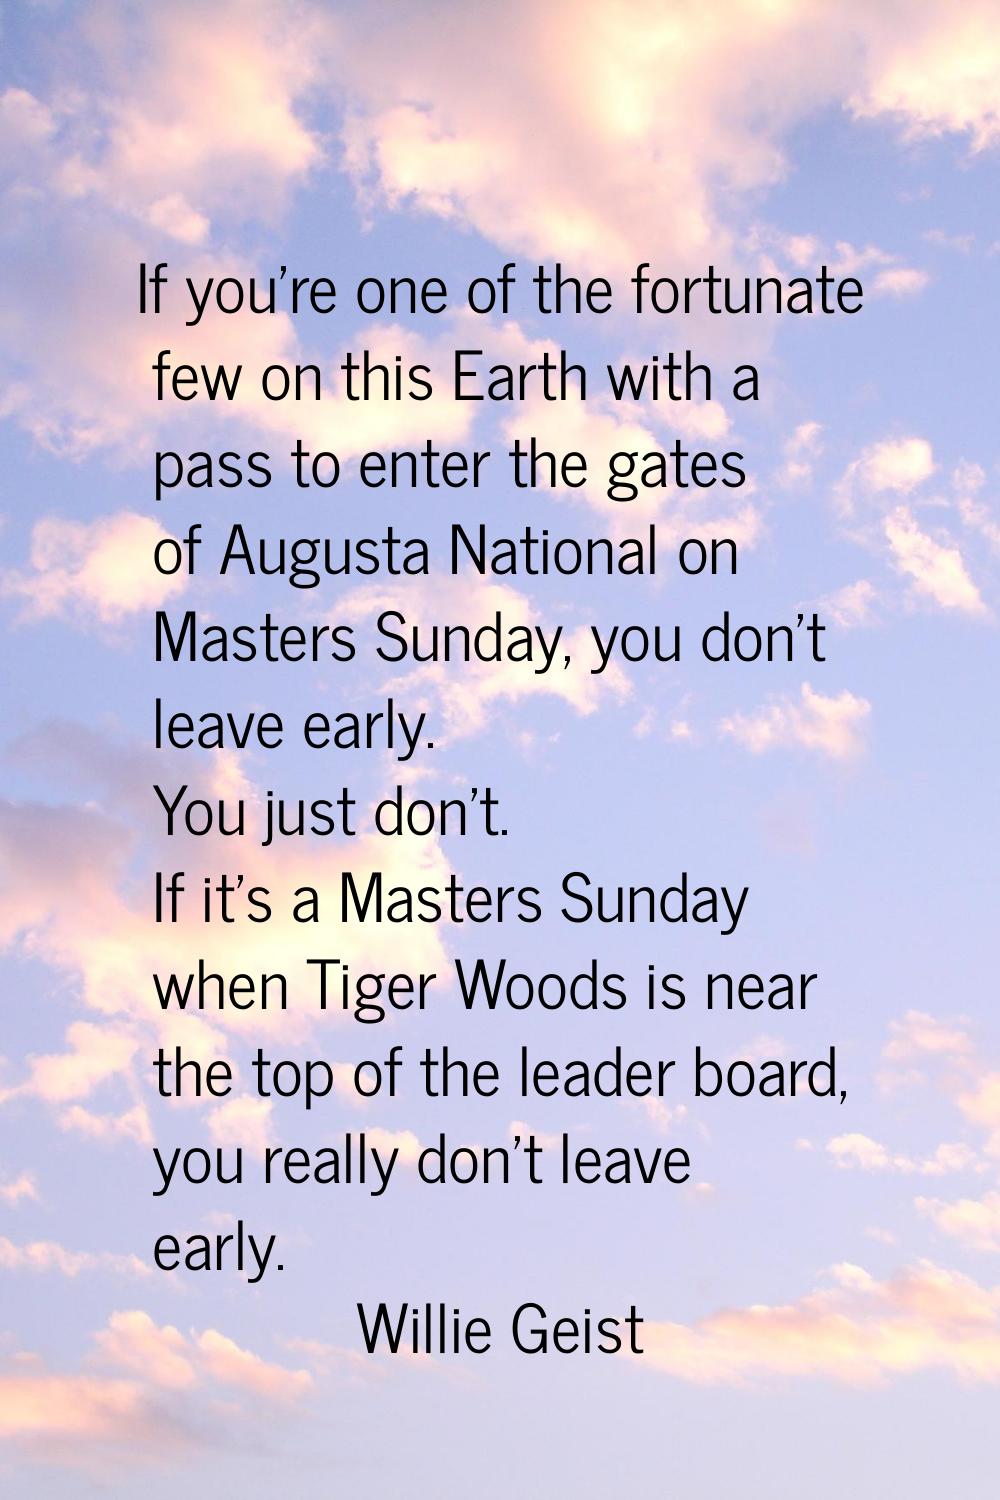 If you're one of the fortunate few on this Earth with a pass to enter the gates of Augusta National